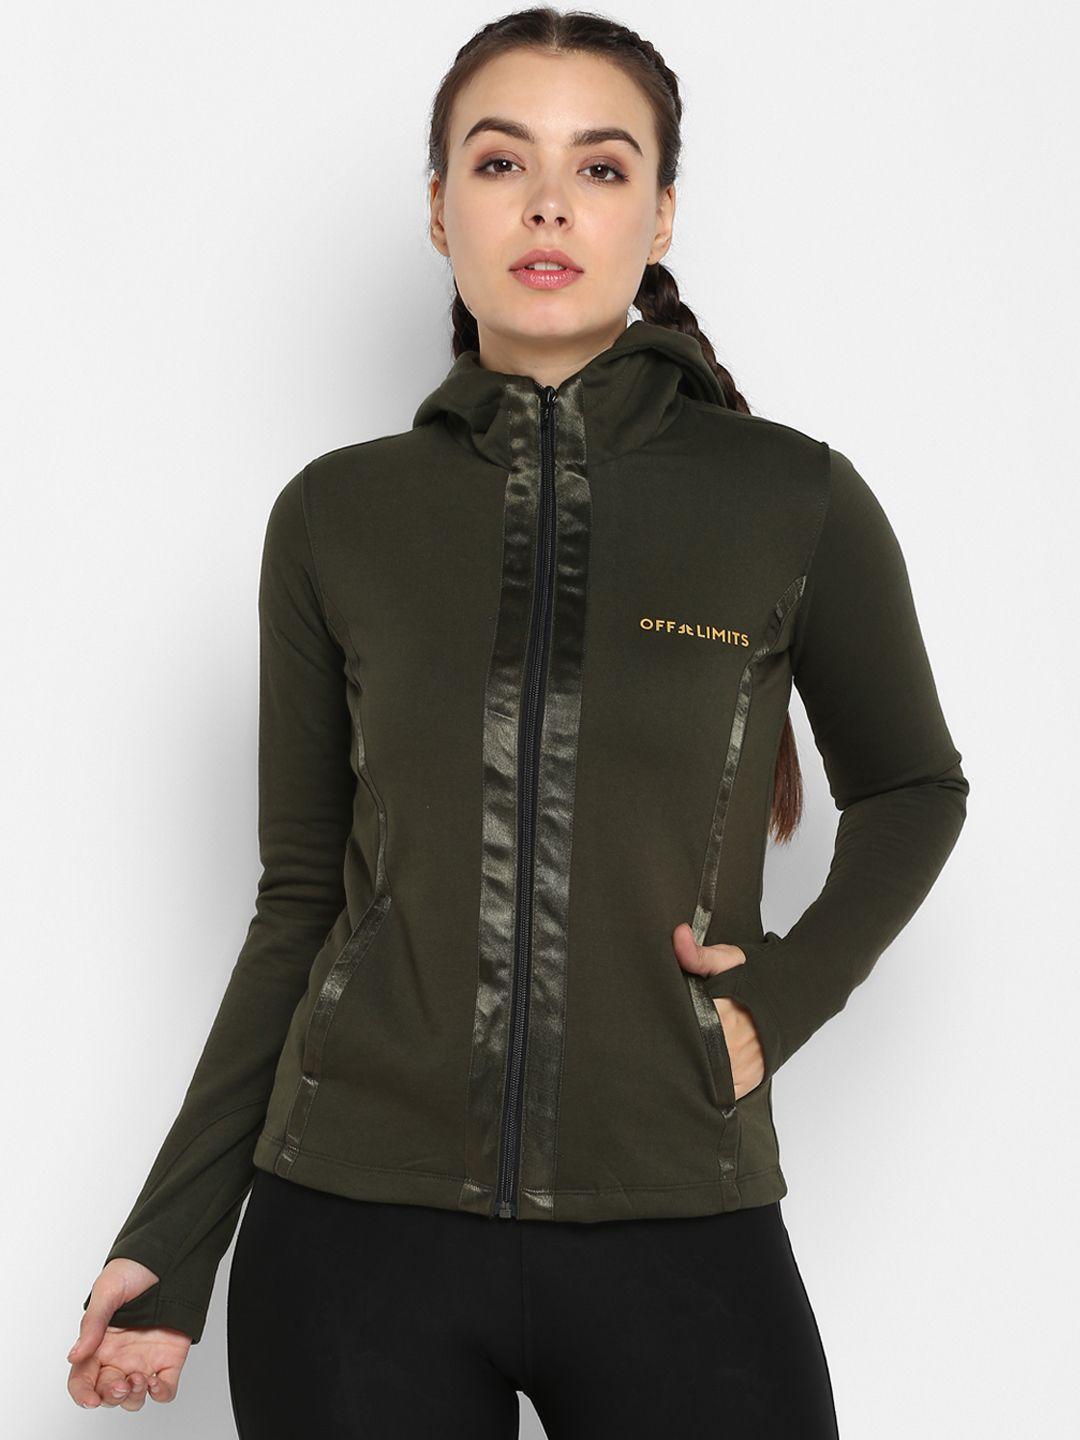 off limits women olive green solid sporty jacket